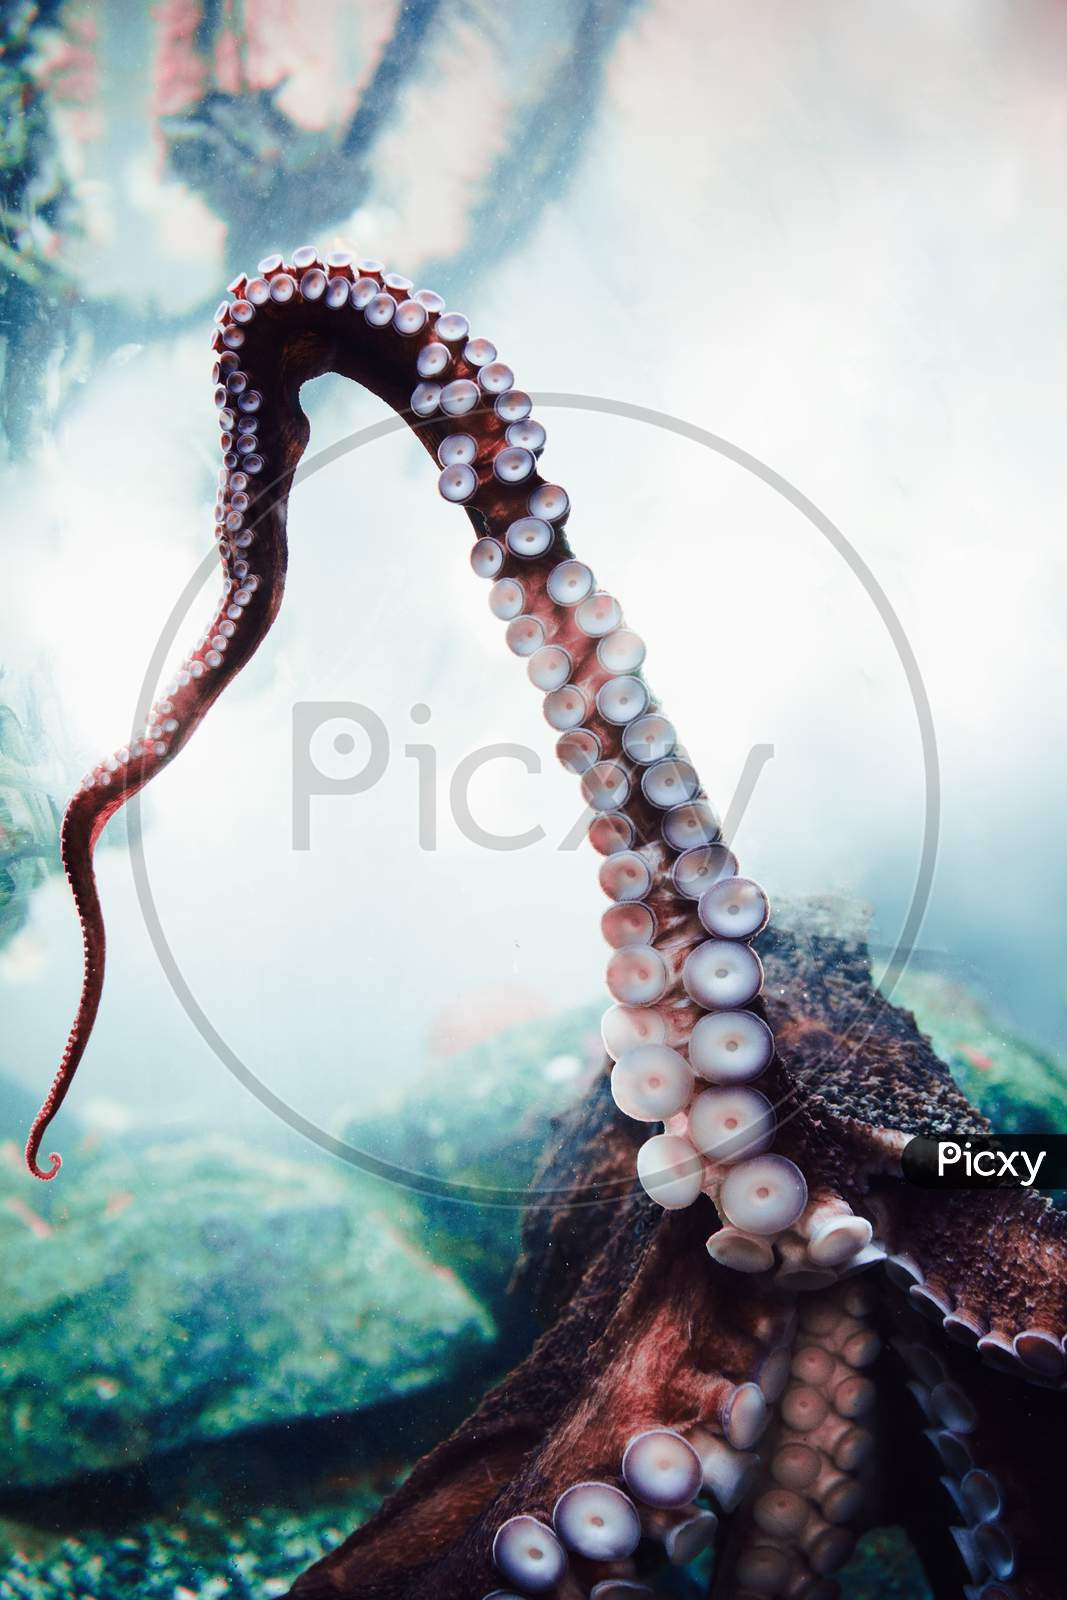 Image of Octopus tentacle-QG966575-Picxy